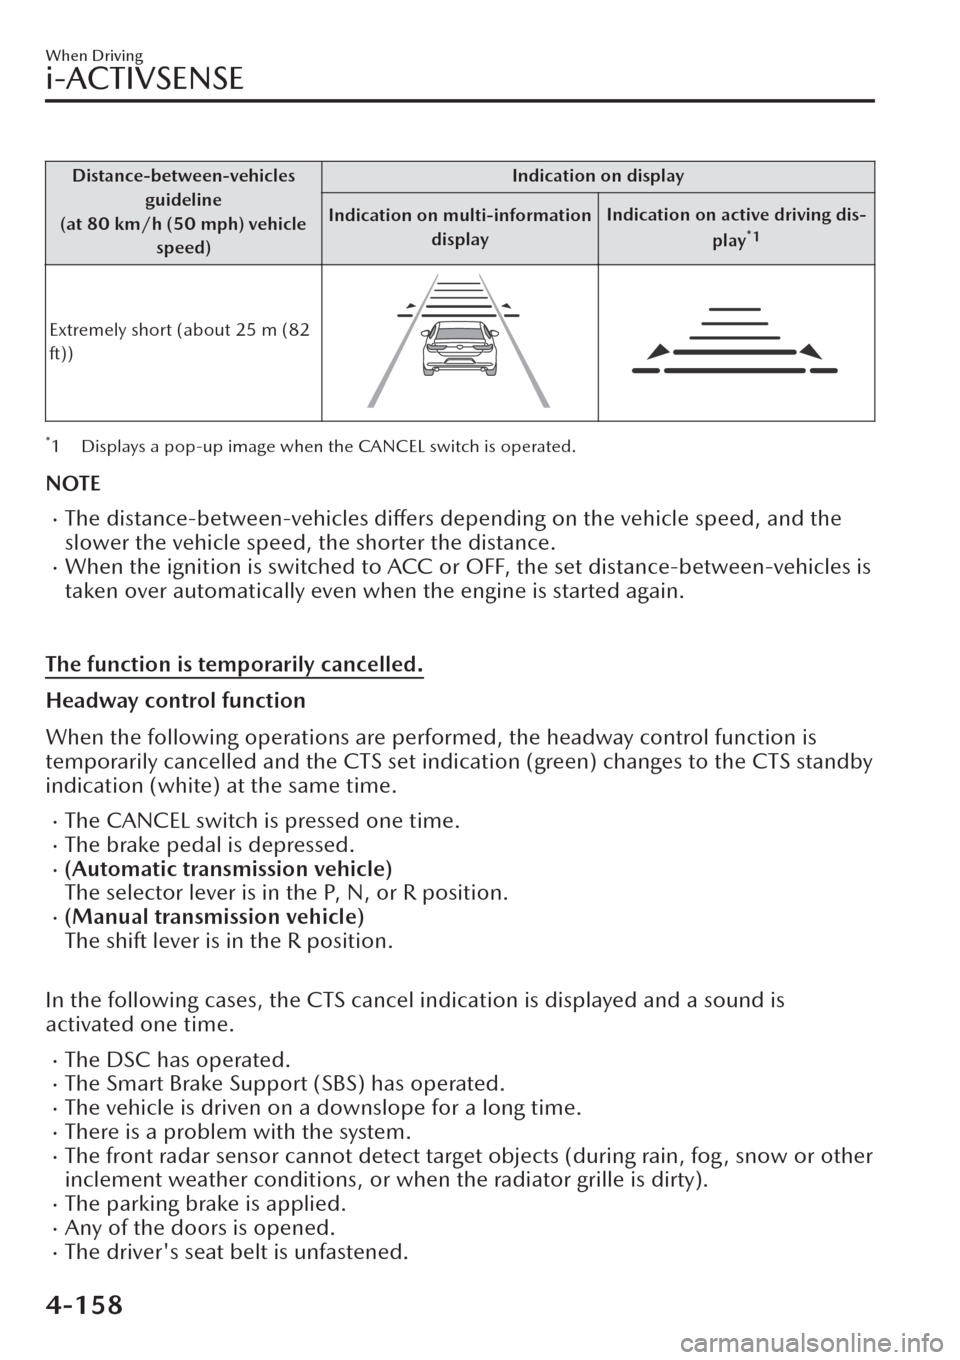 MAZDA MODEL CX-30 2019  Owners Manual (in English) Distance-between-vehicles
guideline
(at 80 km/h (50 mph) vehicle
speed)Indication on display
Indication on multi-information
displayIndication on active driving dis-
play
*1
Extremely short (about 25 